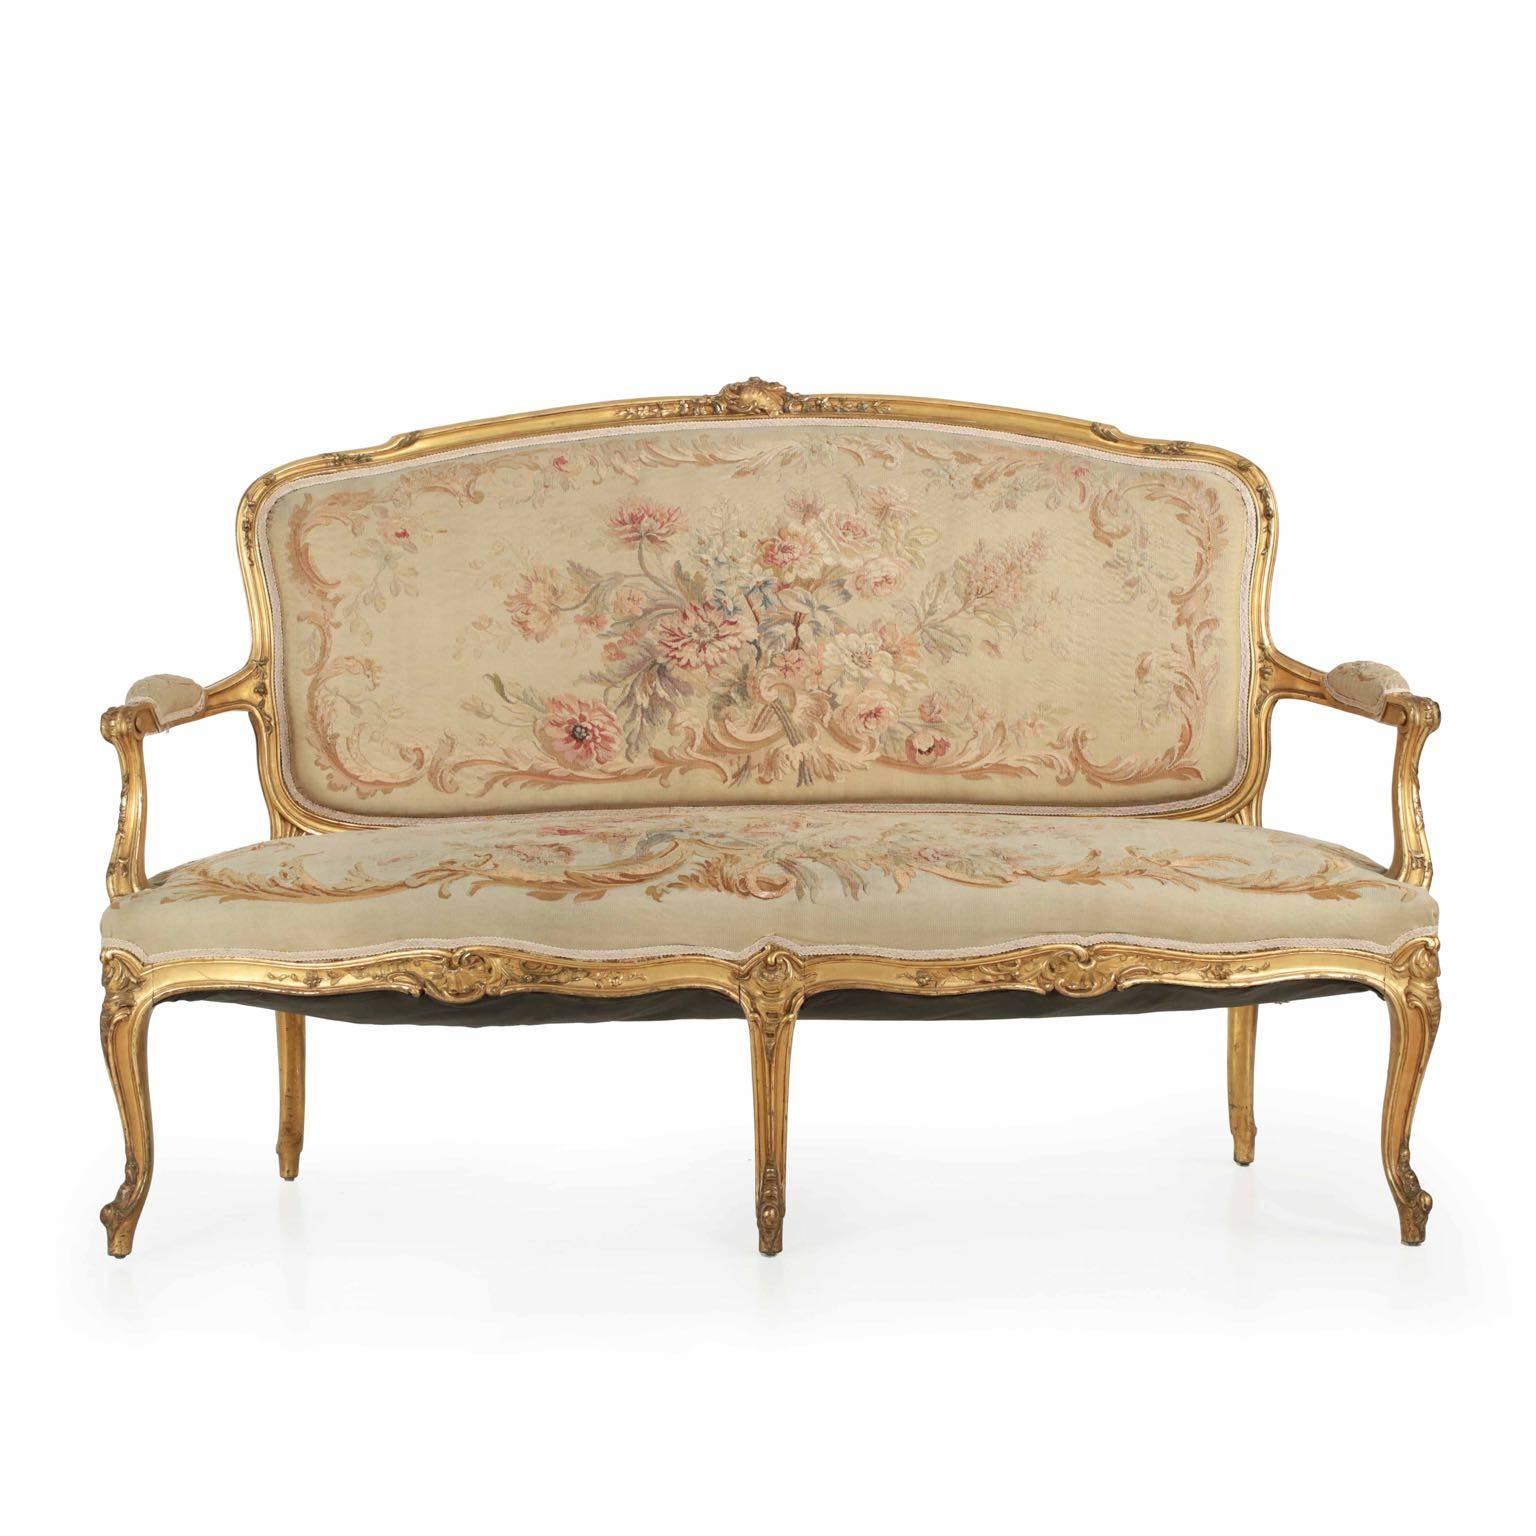 A most fine settee in the Louis XV taste from the turn of the century, this is a statement of rich form and material. Sumptuous curves are highlighted with the most crisp of carvings, these lively Rococo motifs centering around the Rocaille with